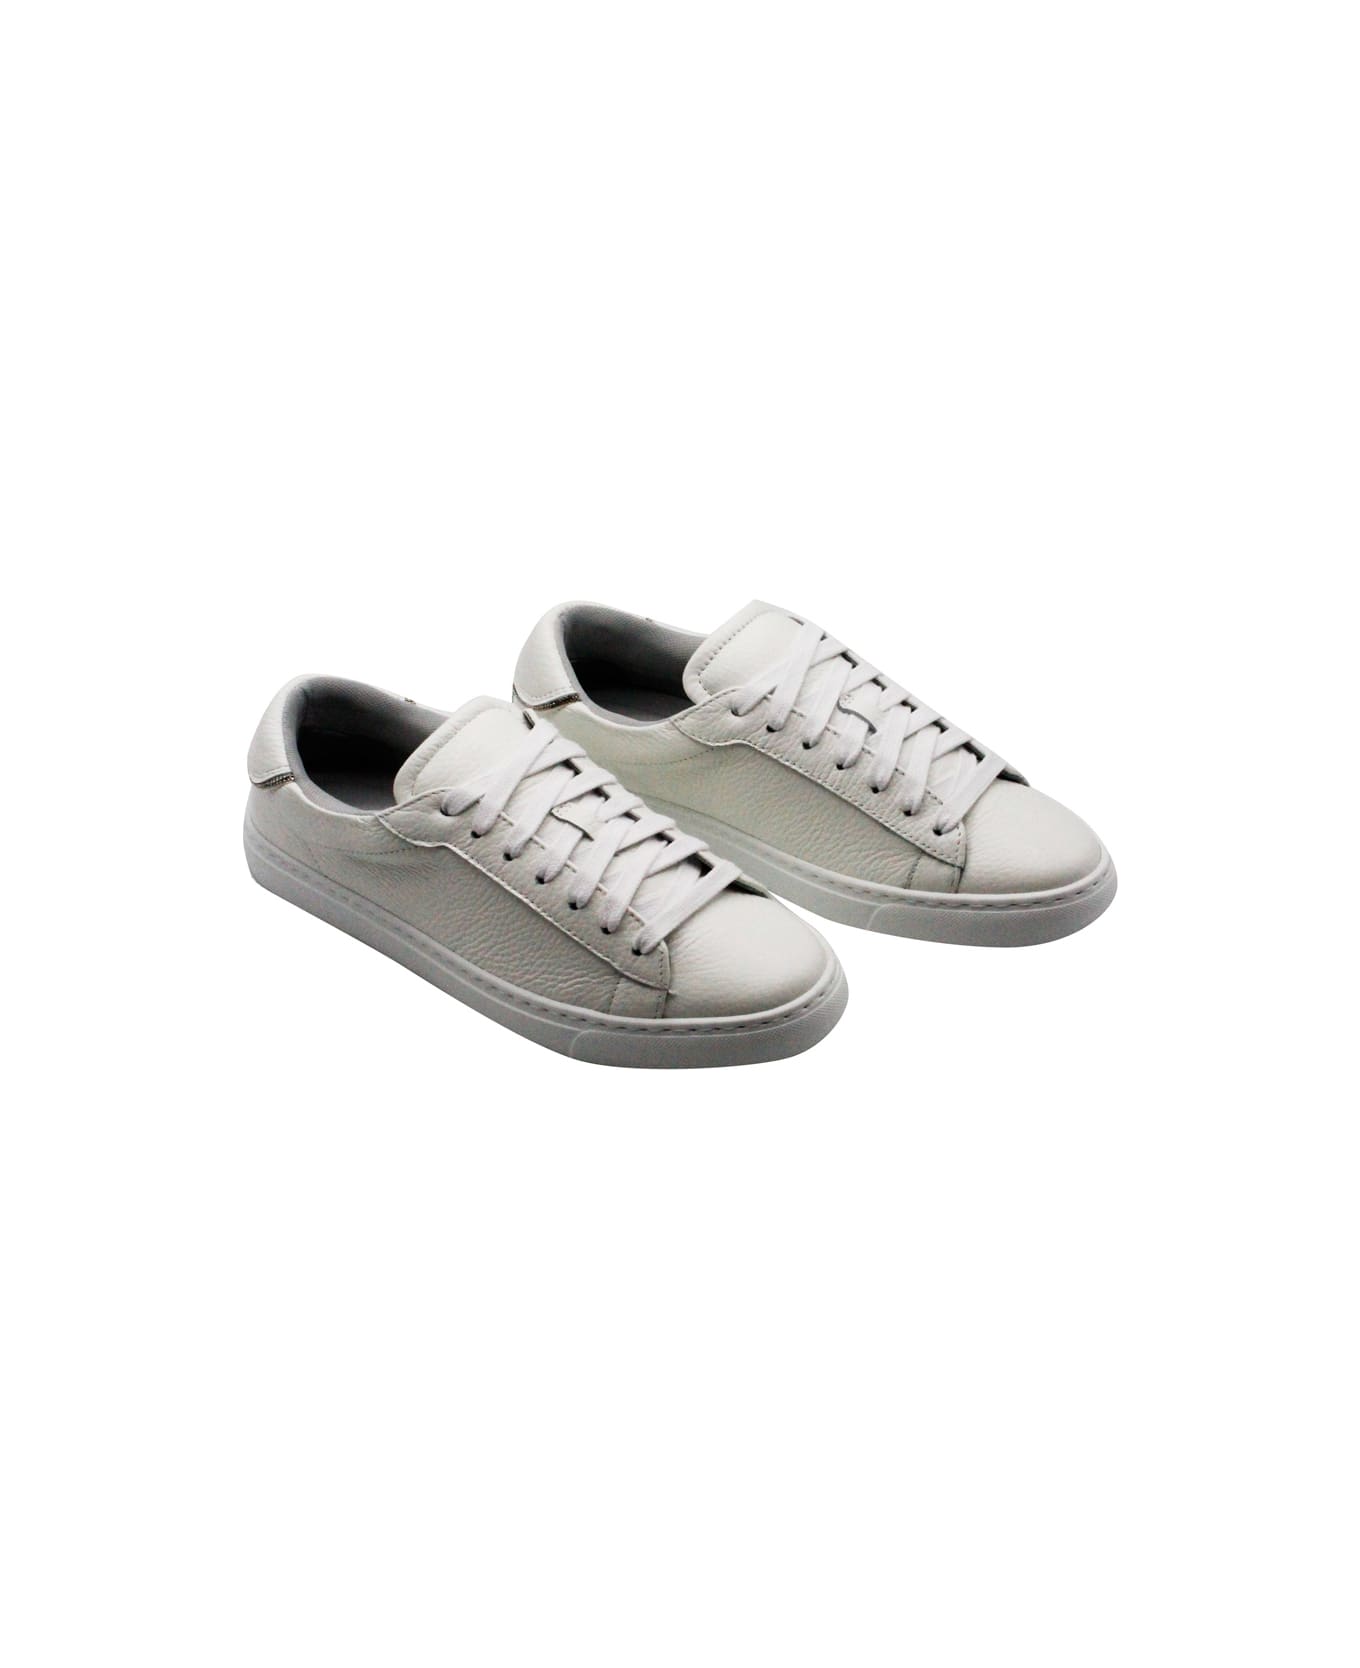 Fabiana Filippi Sneakers In Soft Textured Leather With Rows Of Monili On The Back. Lace Closure - White